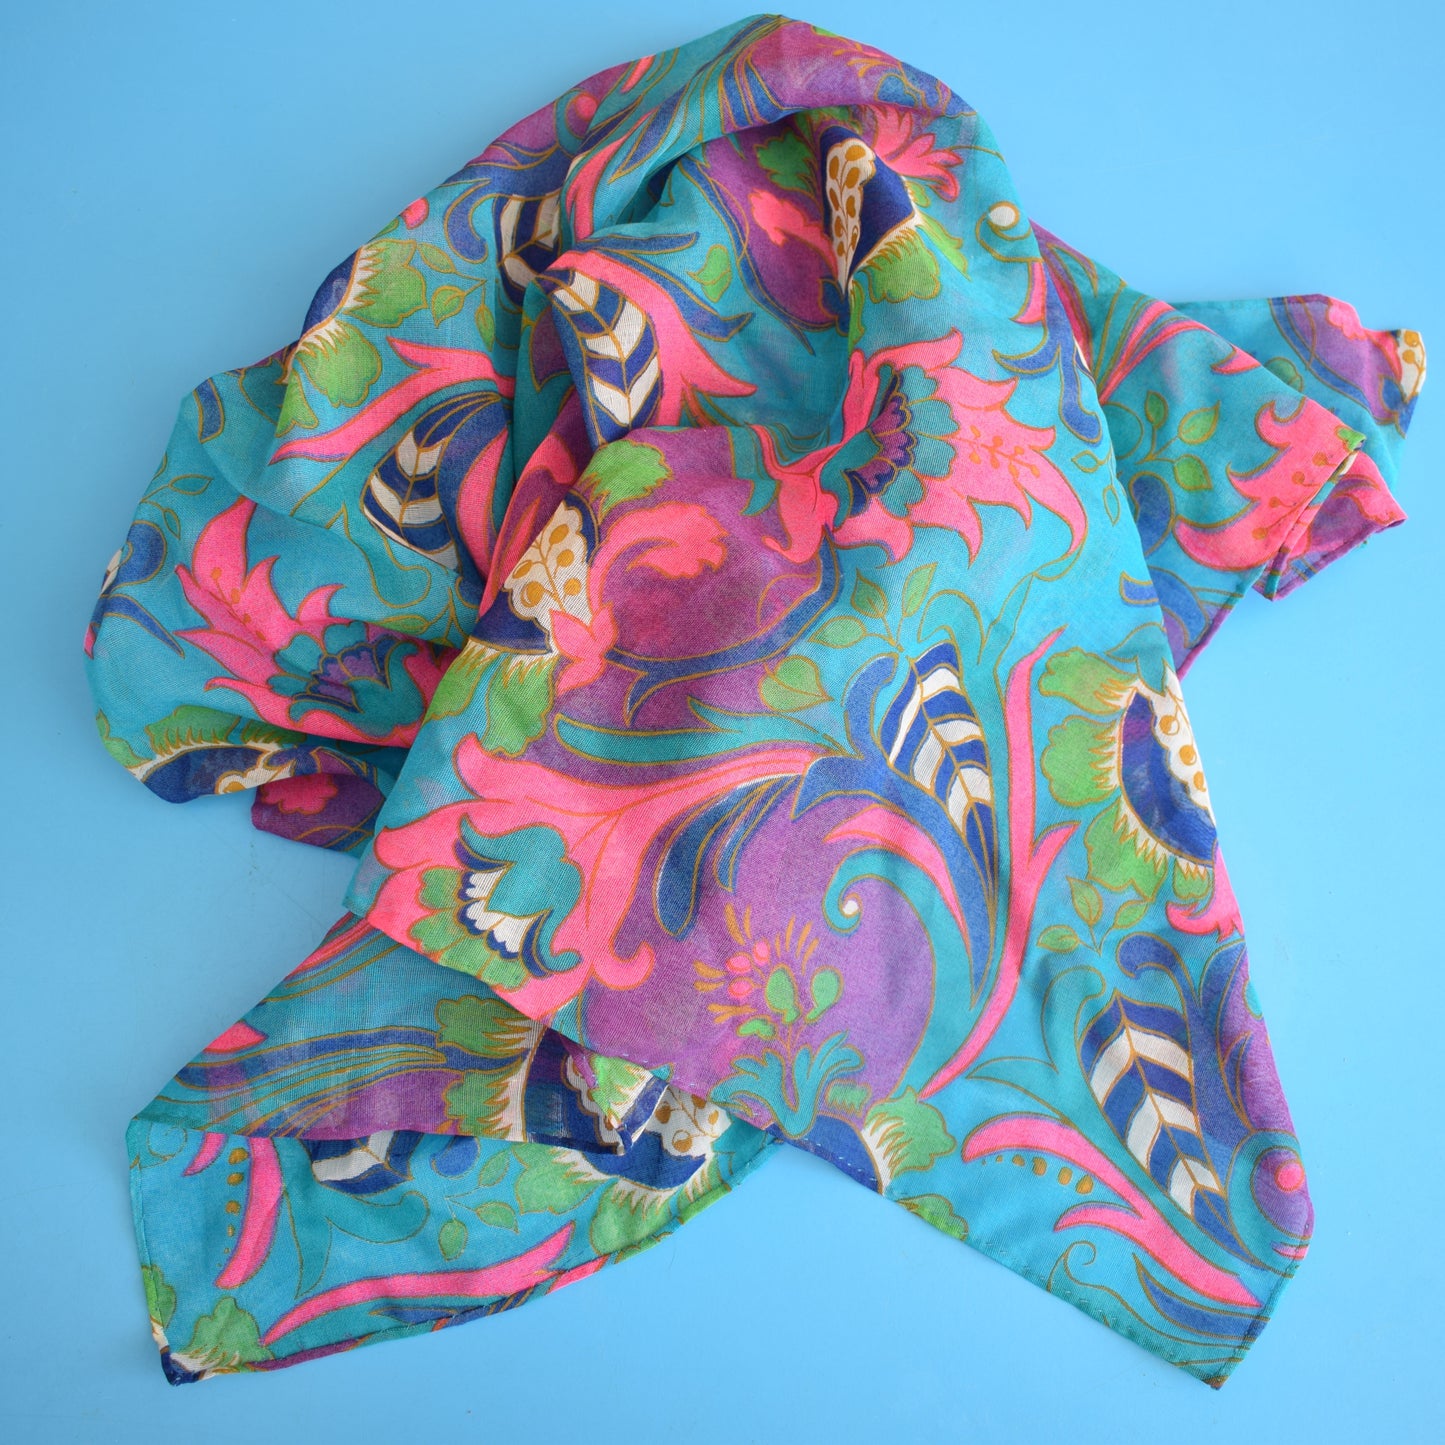 Vintage 1960s Psychedelic Scarf - Pink & Turq